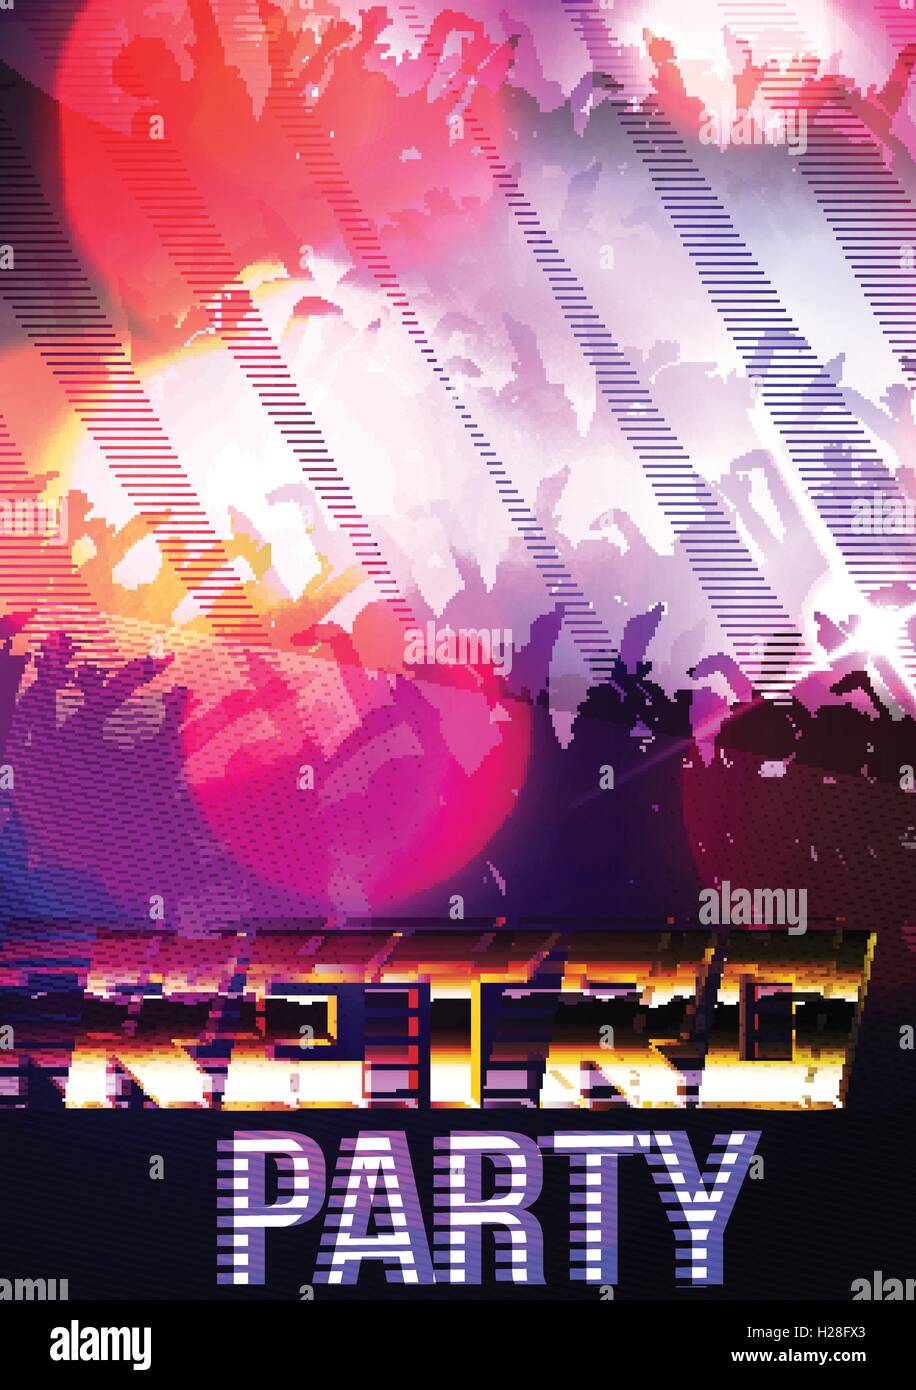 Abstract Digital Glitch Party Poster Background Stock Vector